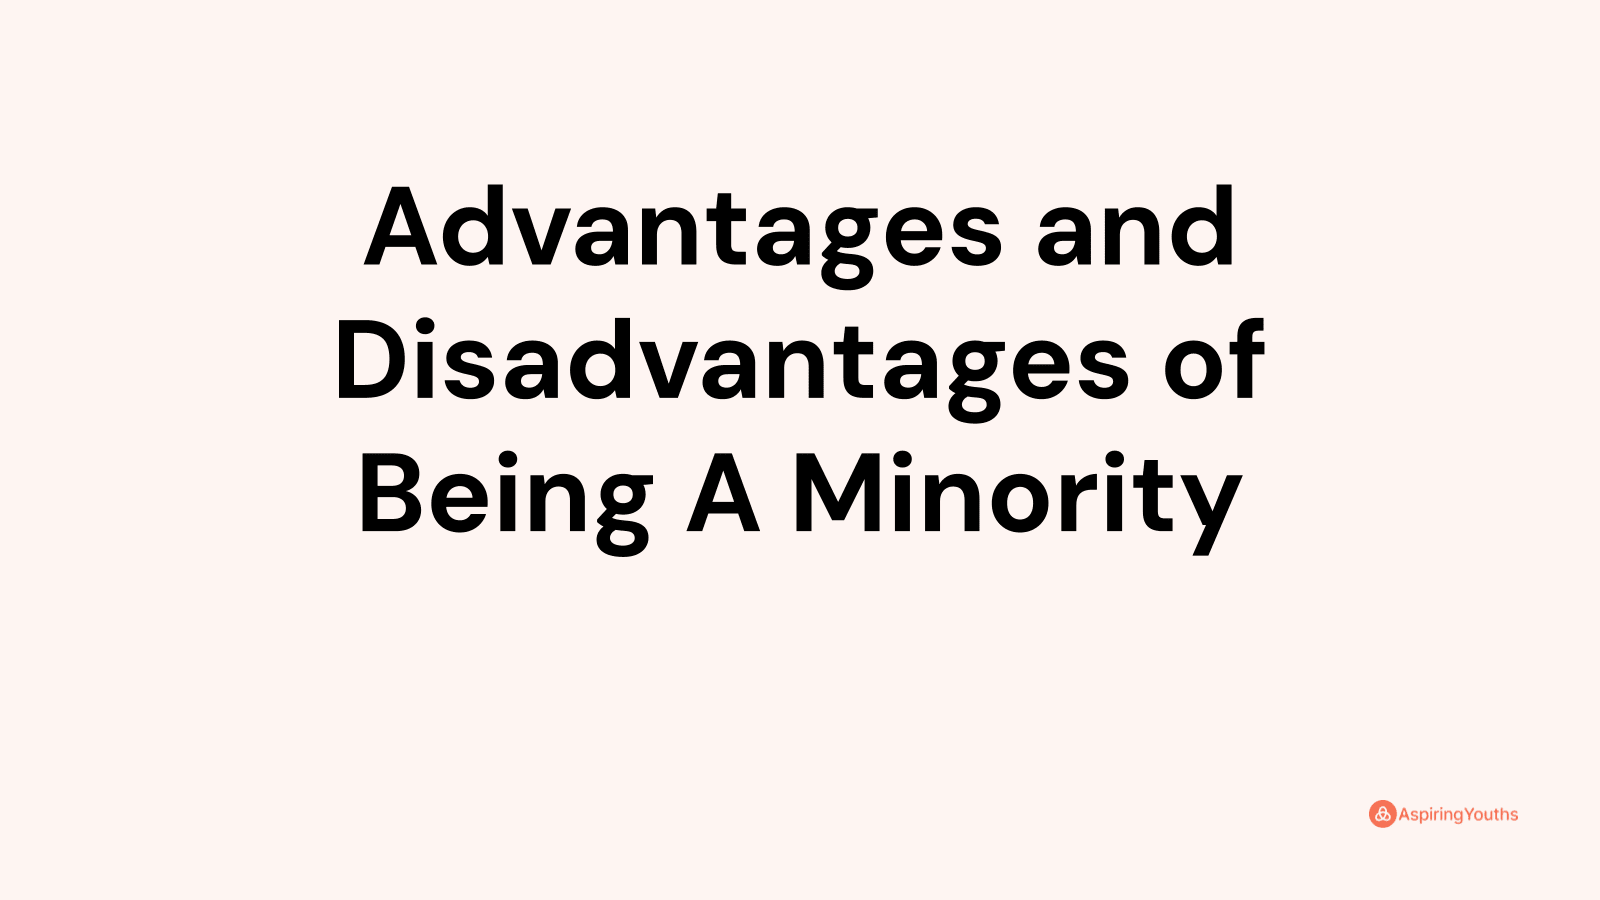 Advantages and disadvantages of Being A Minority